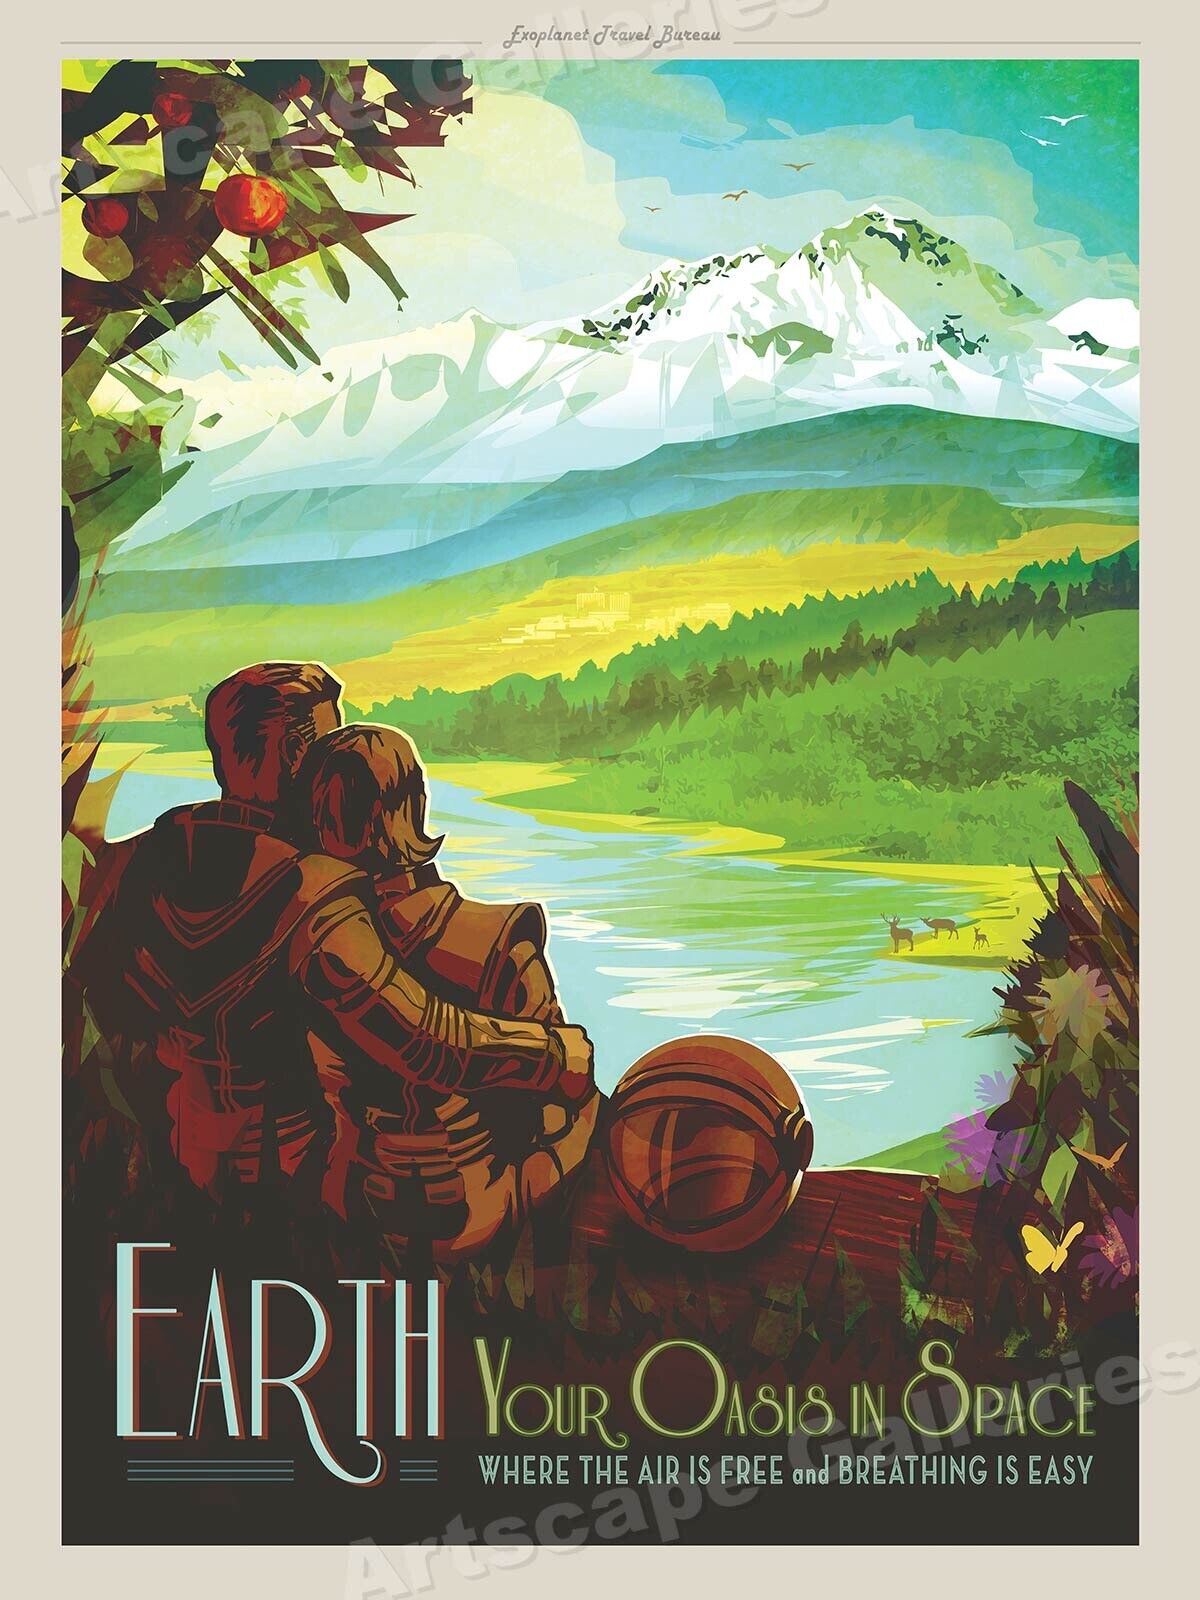 “Earth - Your Oasis is Space” Retro NASA Outer Space Travel Poster - 24x32